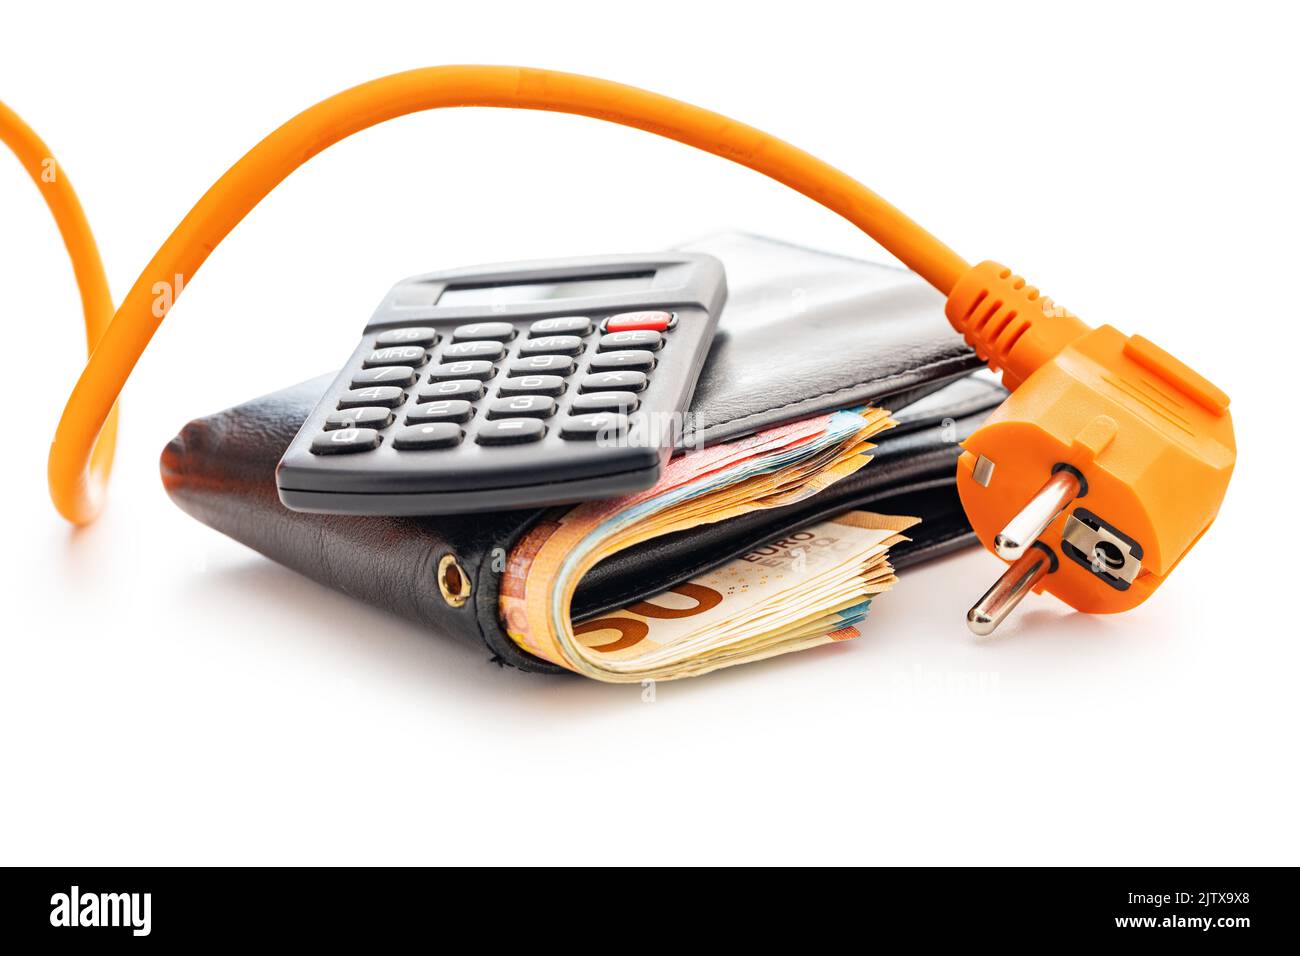 Orange electric plug, wallet with money and calculator isolated on white background. Concept of increasing electricity prices. Stock Photo